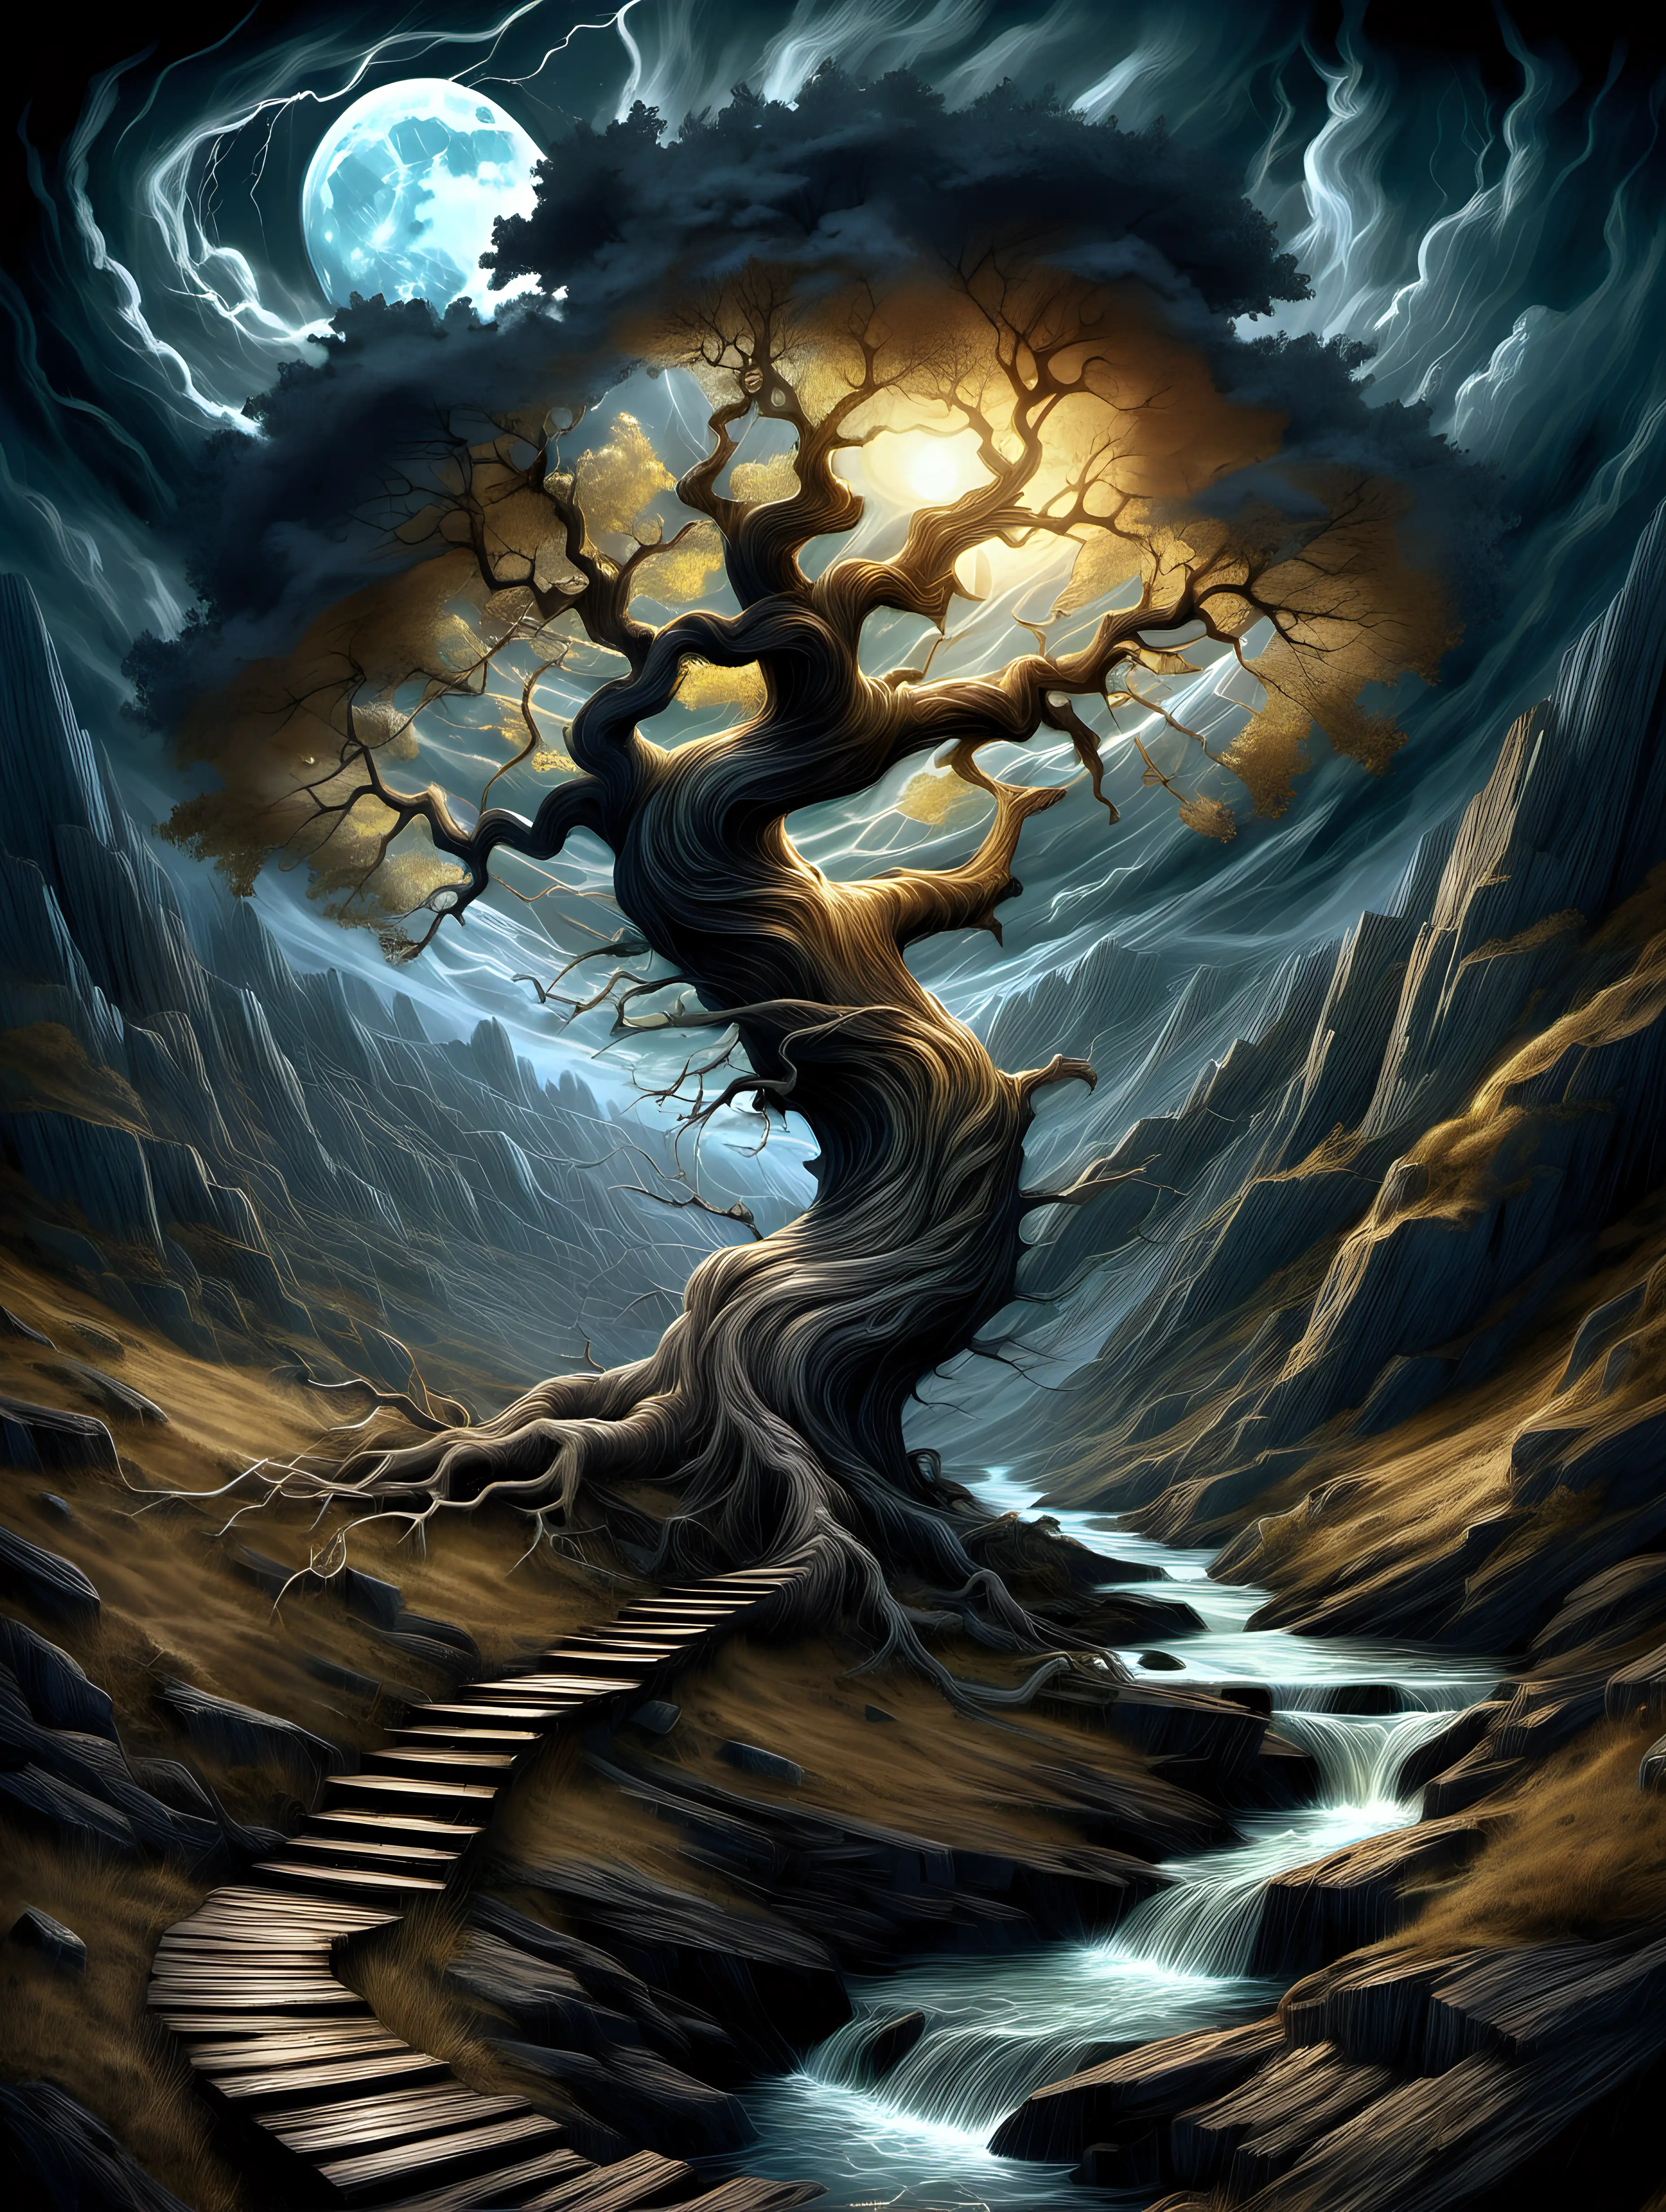 Colourfull,Natural portal, epic cinematic, breathtaking, intricate, insanely detailed hand drawing of dramatic storm clouds, dark night and bright moonlight on an aesthetically remarkable old oak tree tousled by the stream, a restless river, a winding path, mountains, in the style of Tomasz Allen Kopera, Dariusz Zawadzki, Andreja Peklar, Ivan Shiskin, Jean-Baptiste Monge, Rebecca Guay, breathtaking surreal landscape ​